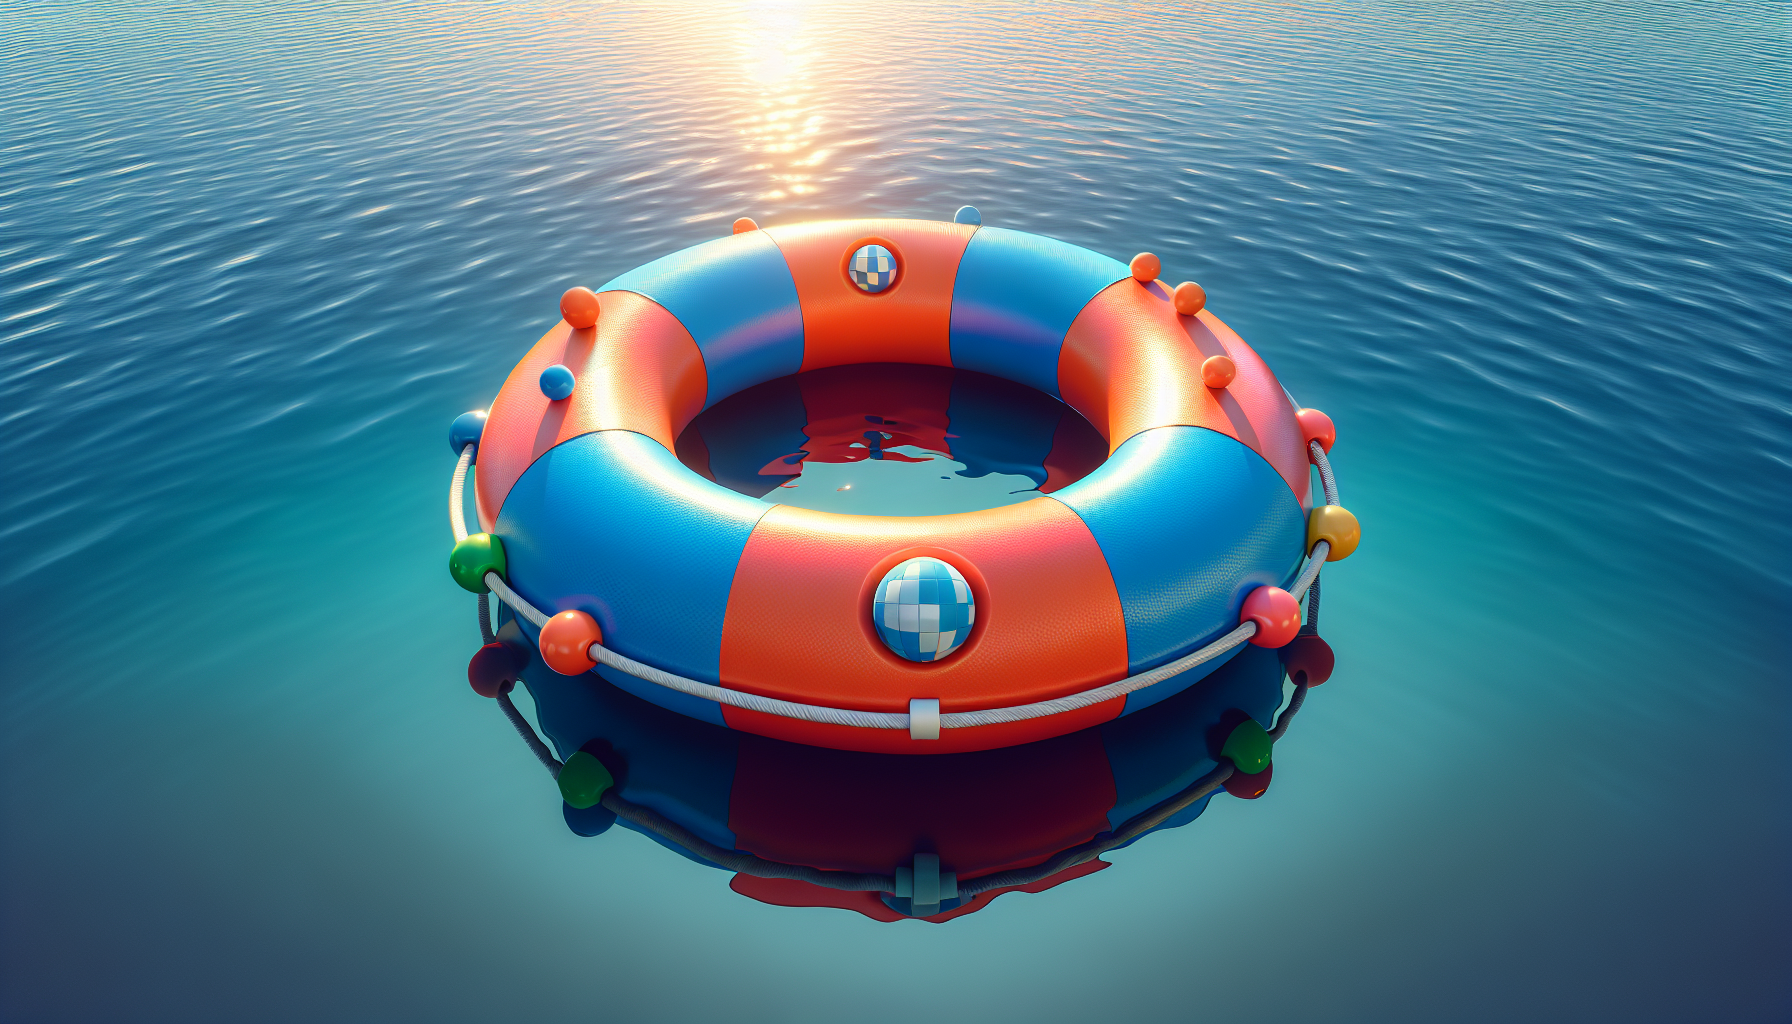 Inflatable Pool Safety Tips For Non-Swimmers